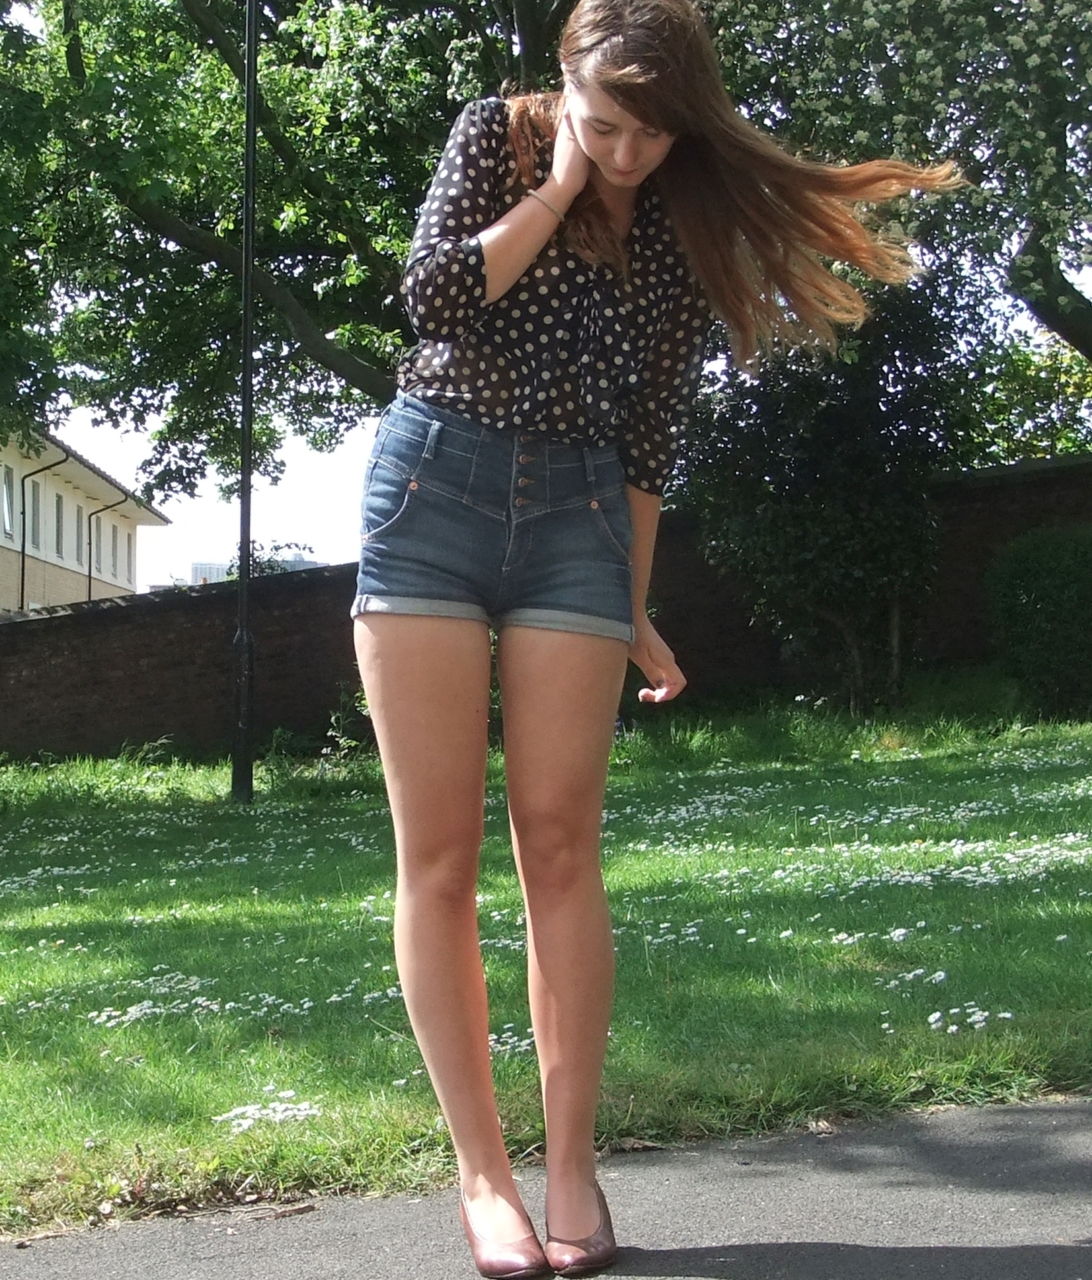 Polka dot blouse with denim shorts and vintage shoes